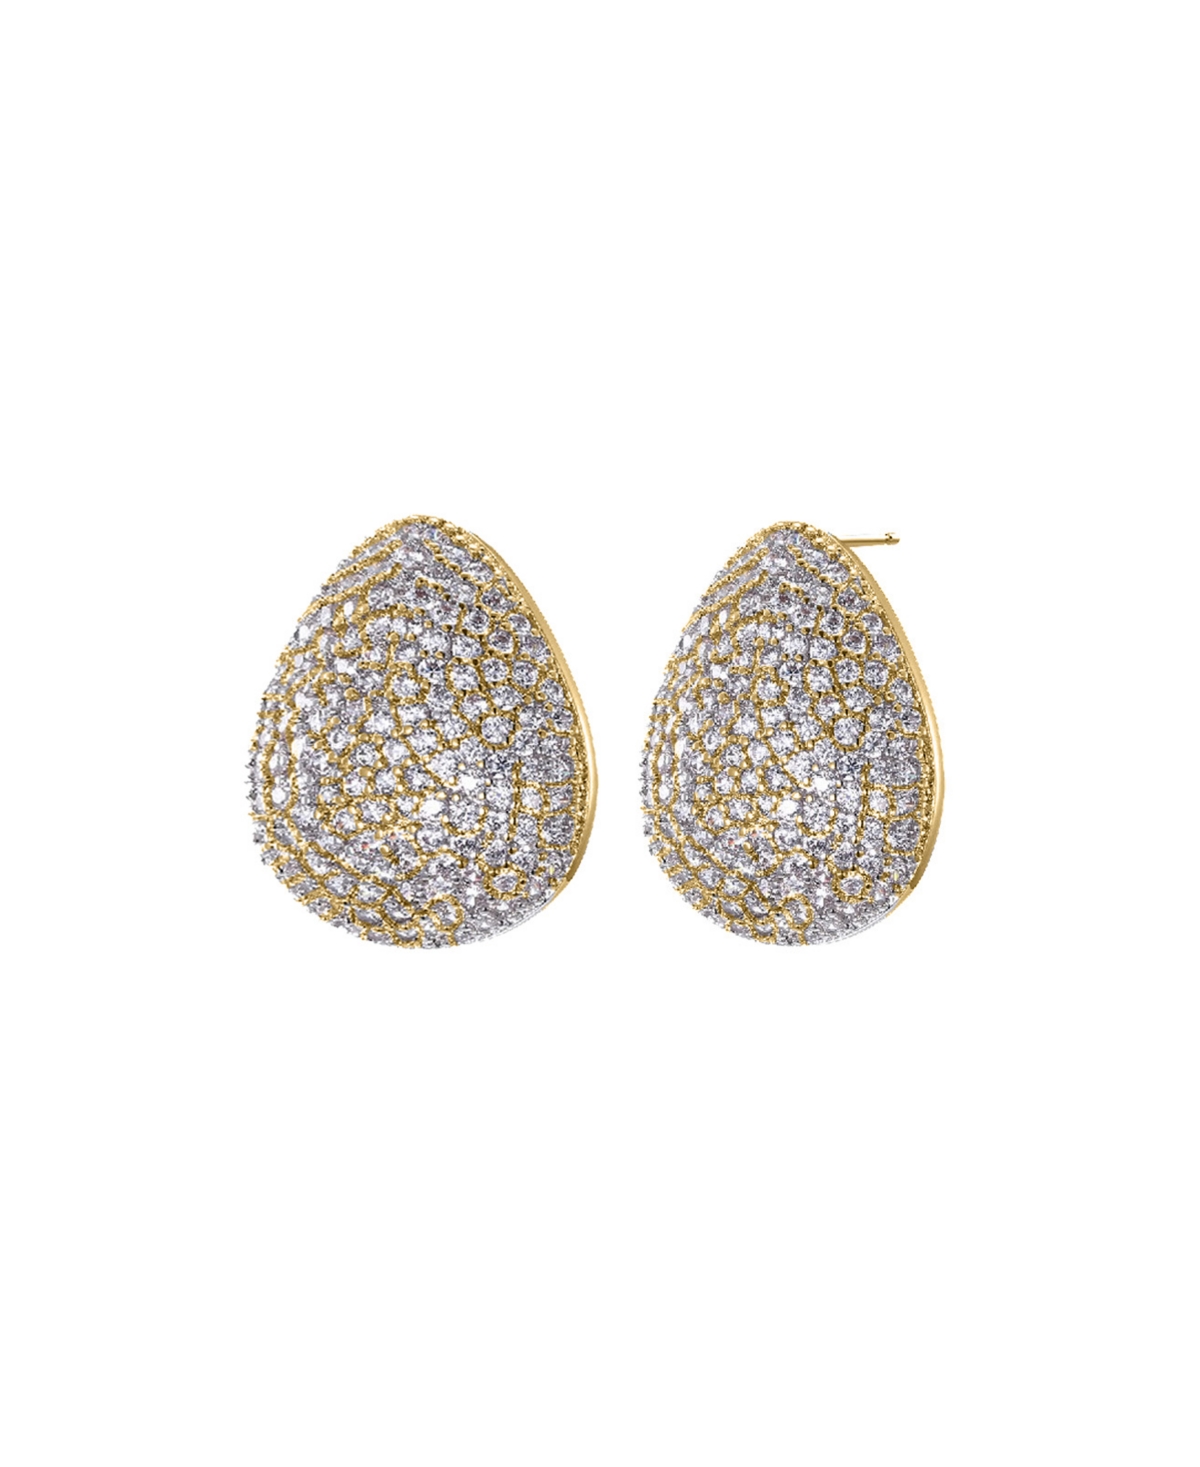 Pave Puffy on the Ear Stud Earring - Gold